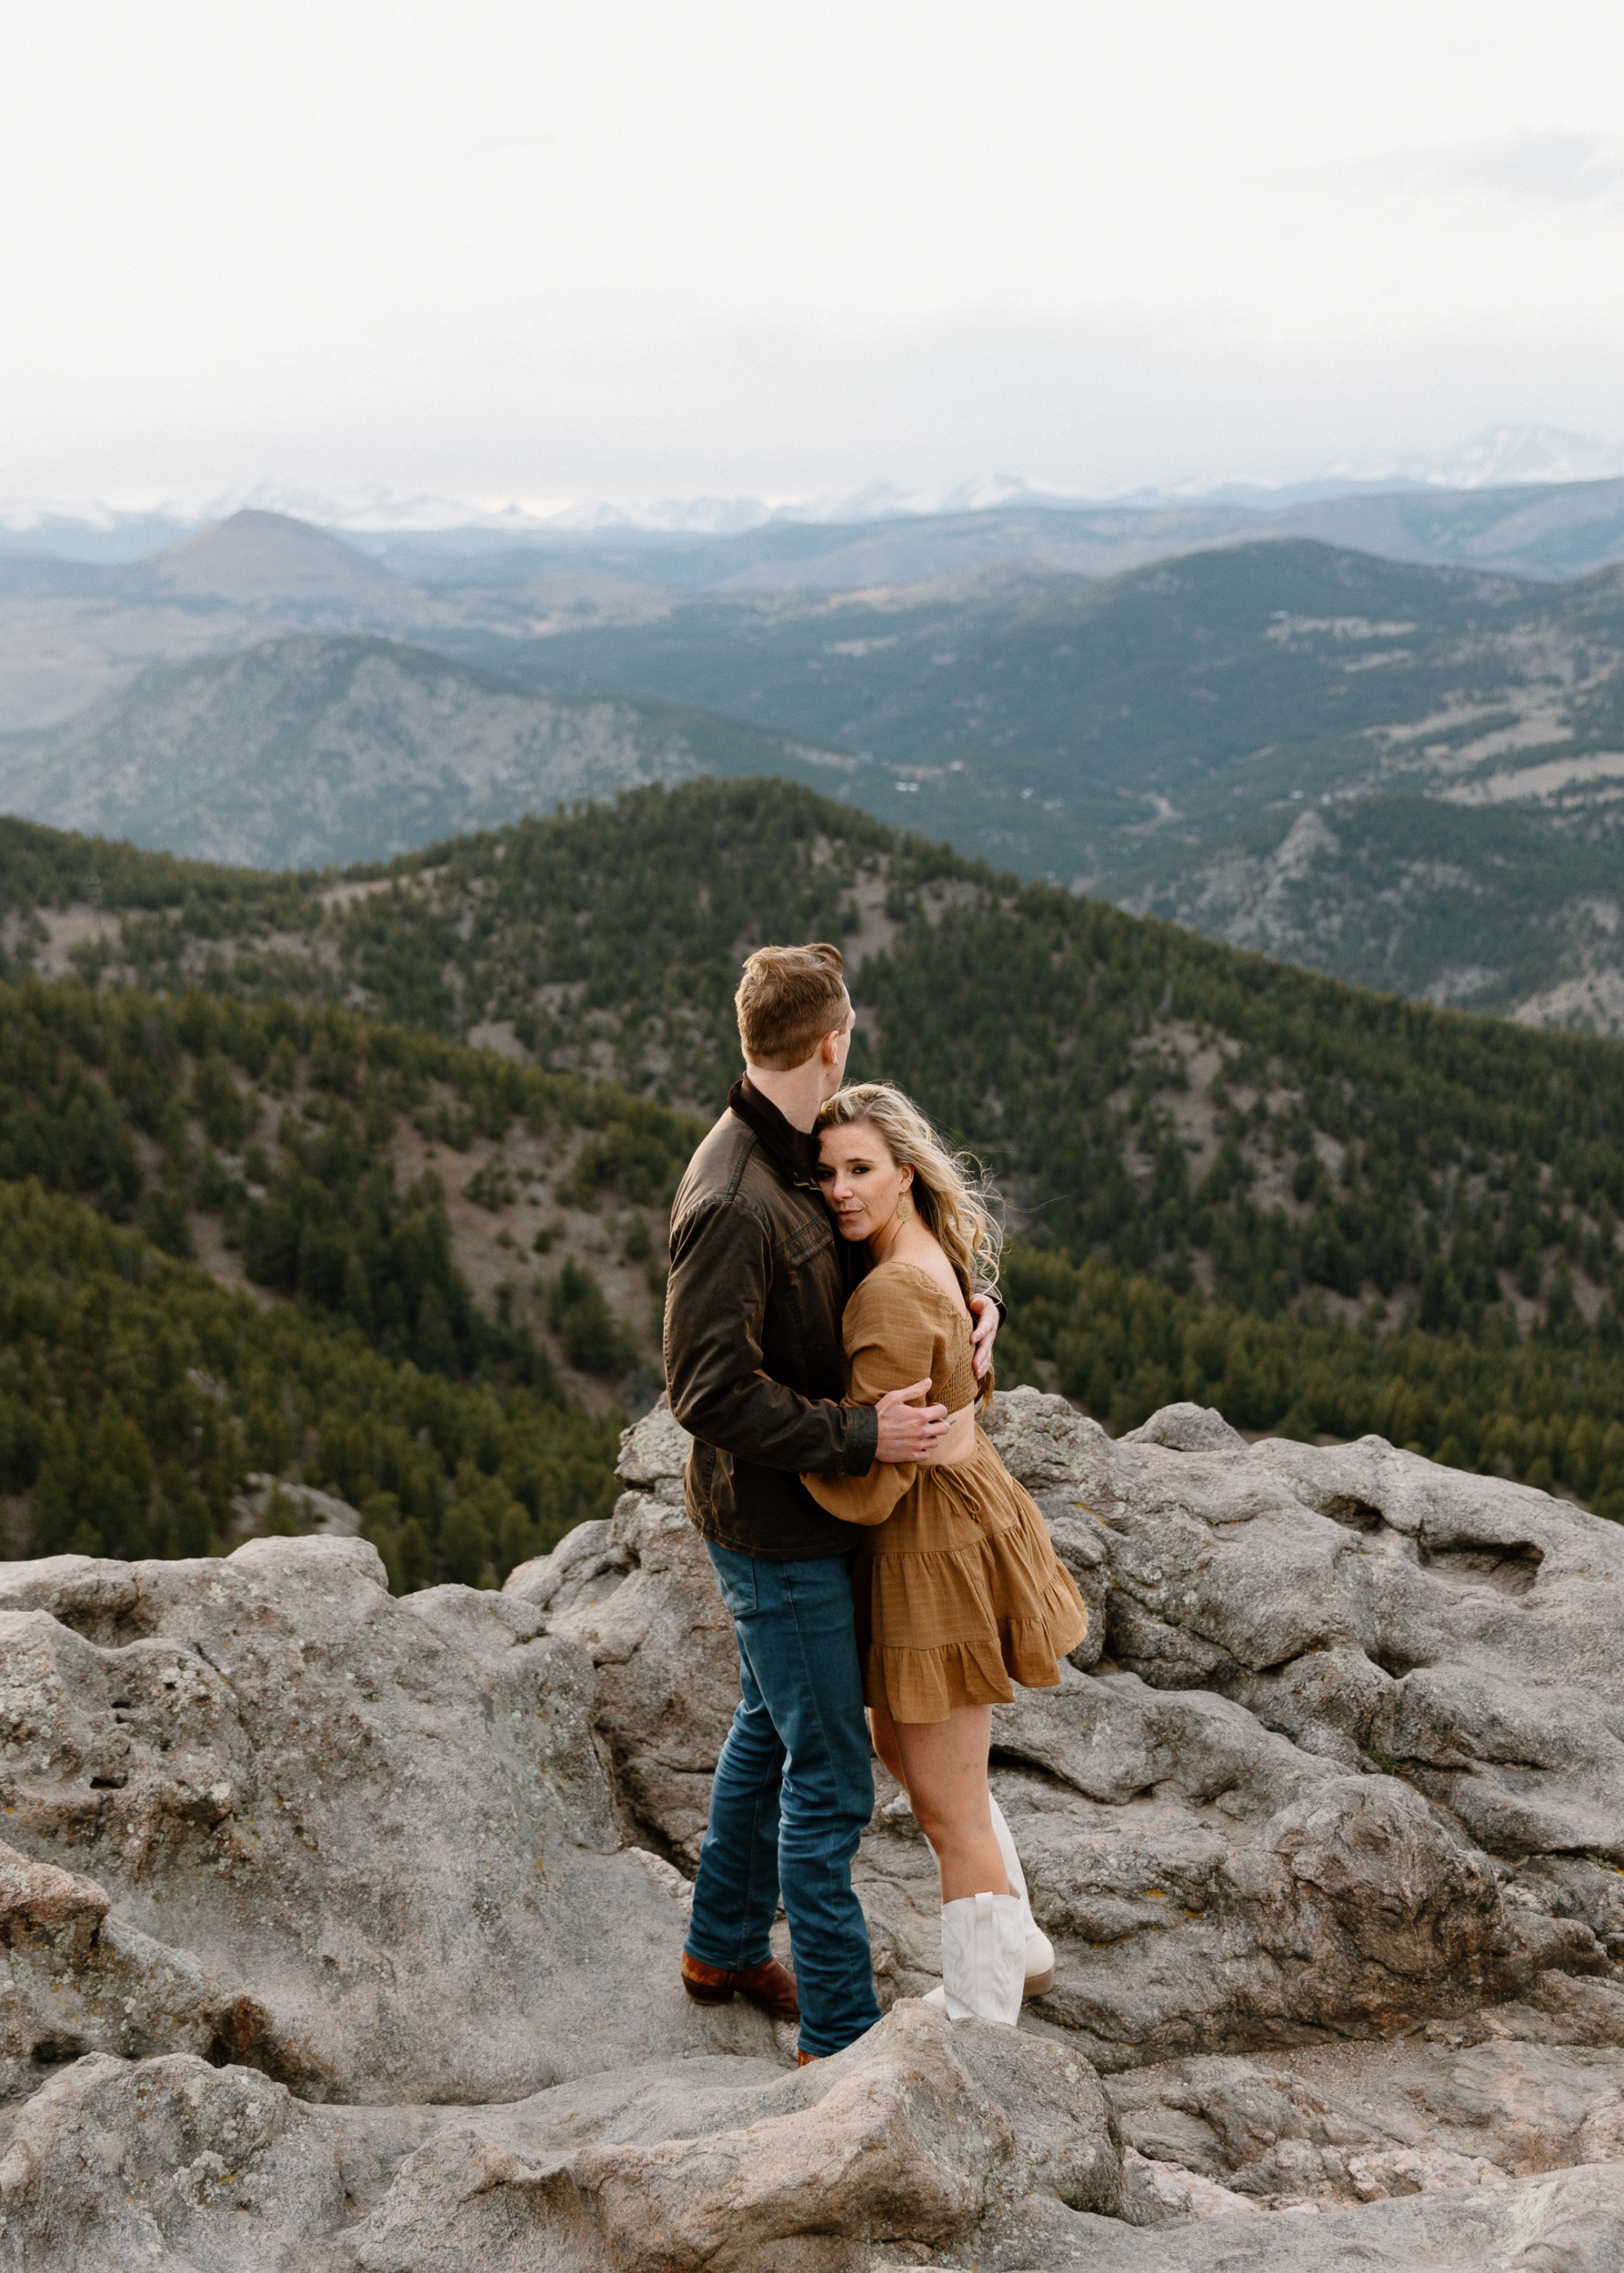 Adventurous couple embracing at Lost Gulch Overlook in Colorado, surrounded by stunning mountain vistas.